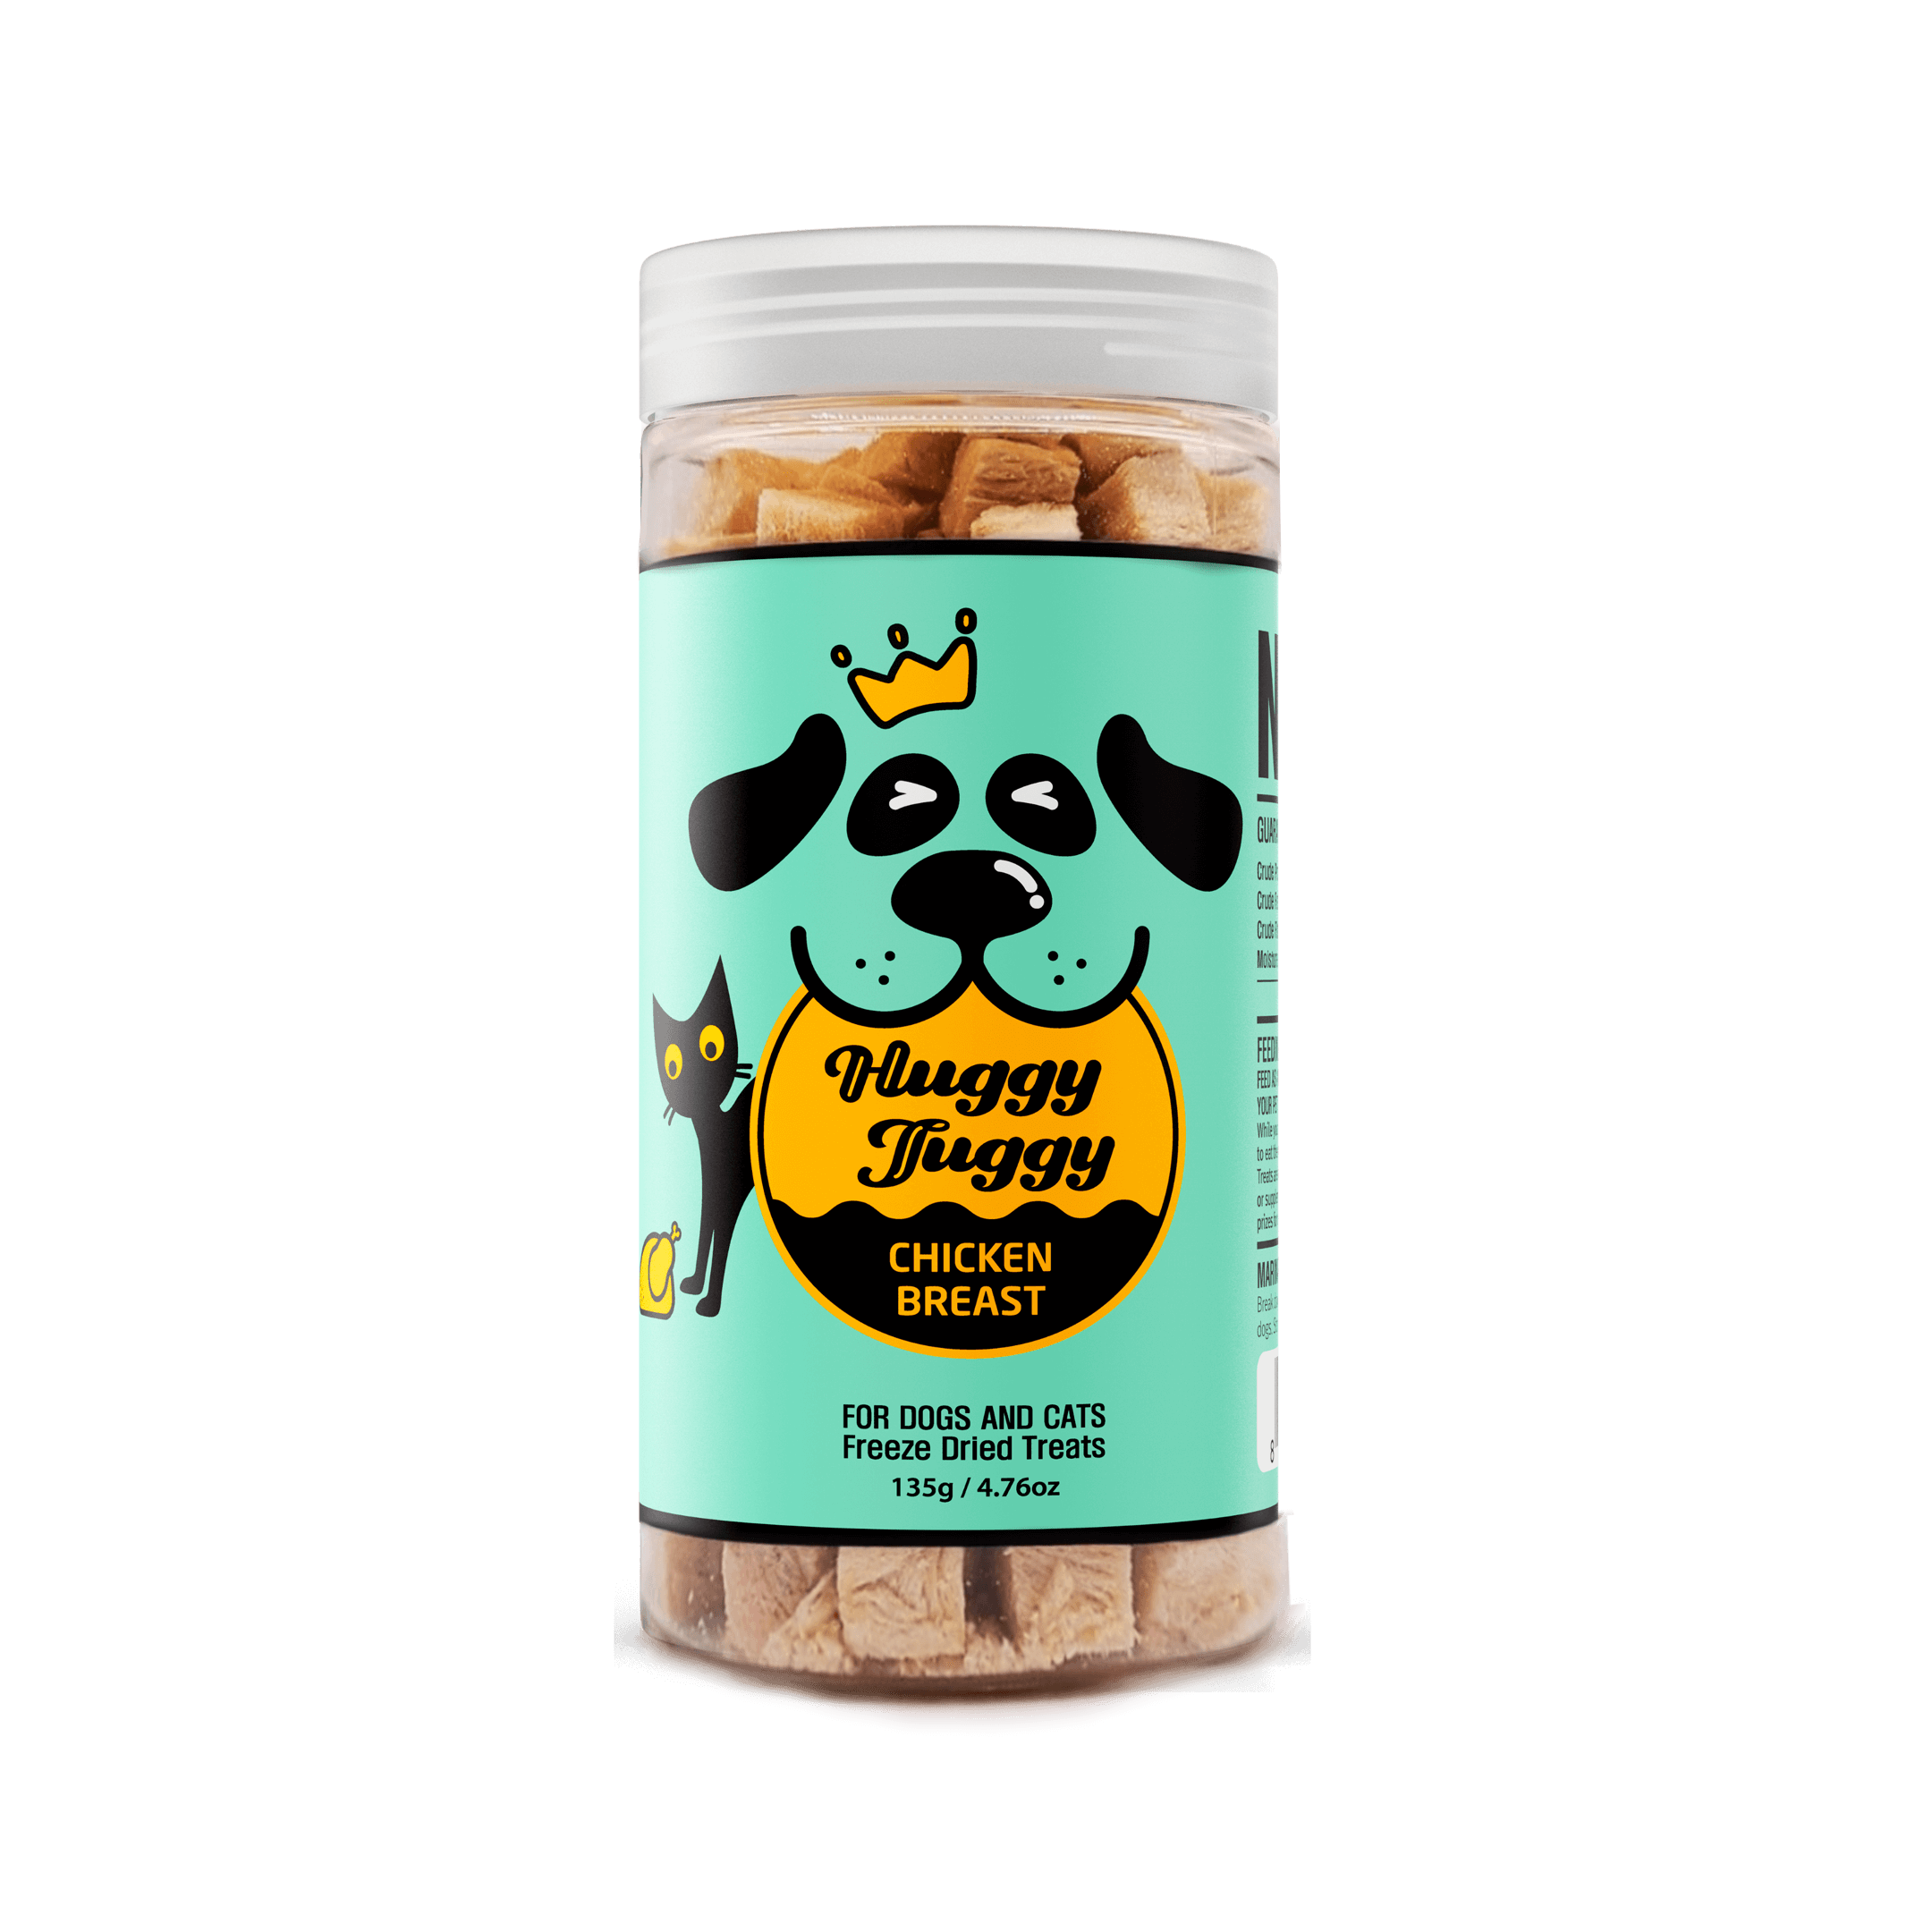 Huggy Tuggy Freeze-Dried Chicken Breast Treats for Dogs and Cats - Natural Single Ingredient Pet Food, High Protein - No Fillers, Preservatives, or Additives - 4.76 Oz